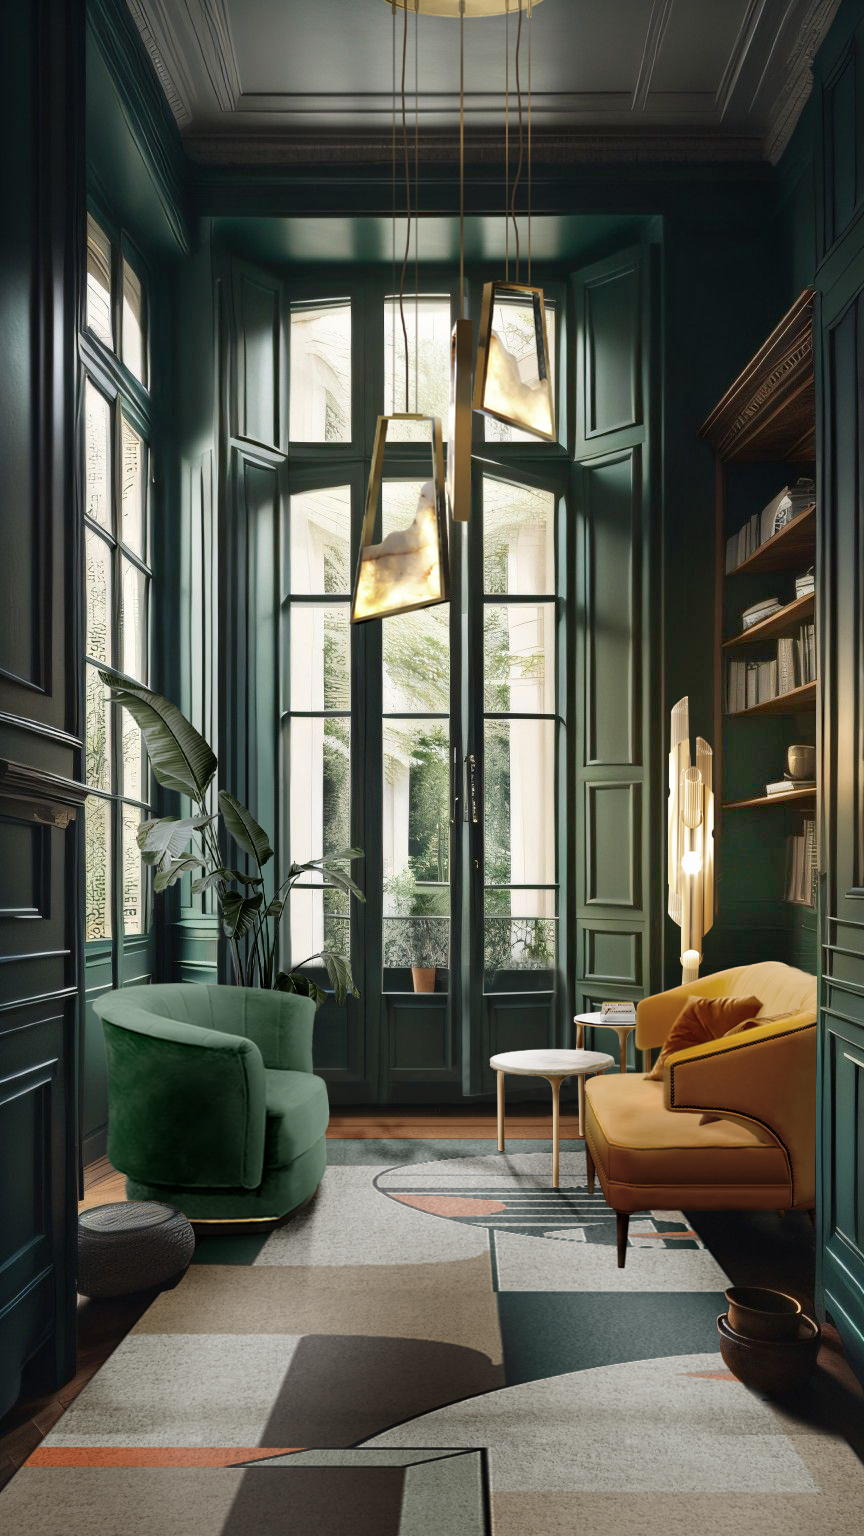 Contemporary Reading Corner With Green Hues - Home'Society